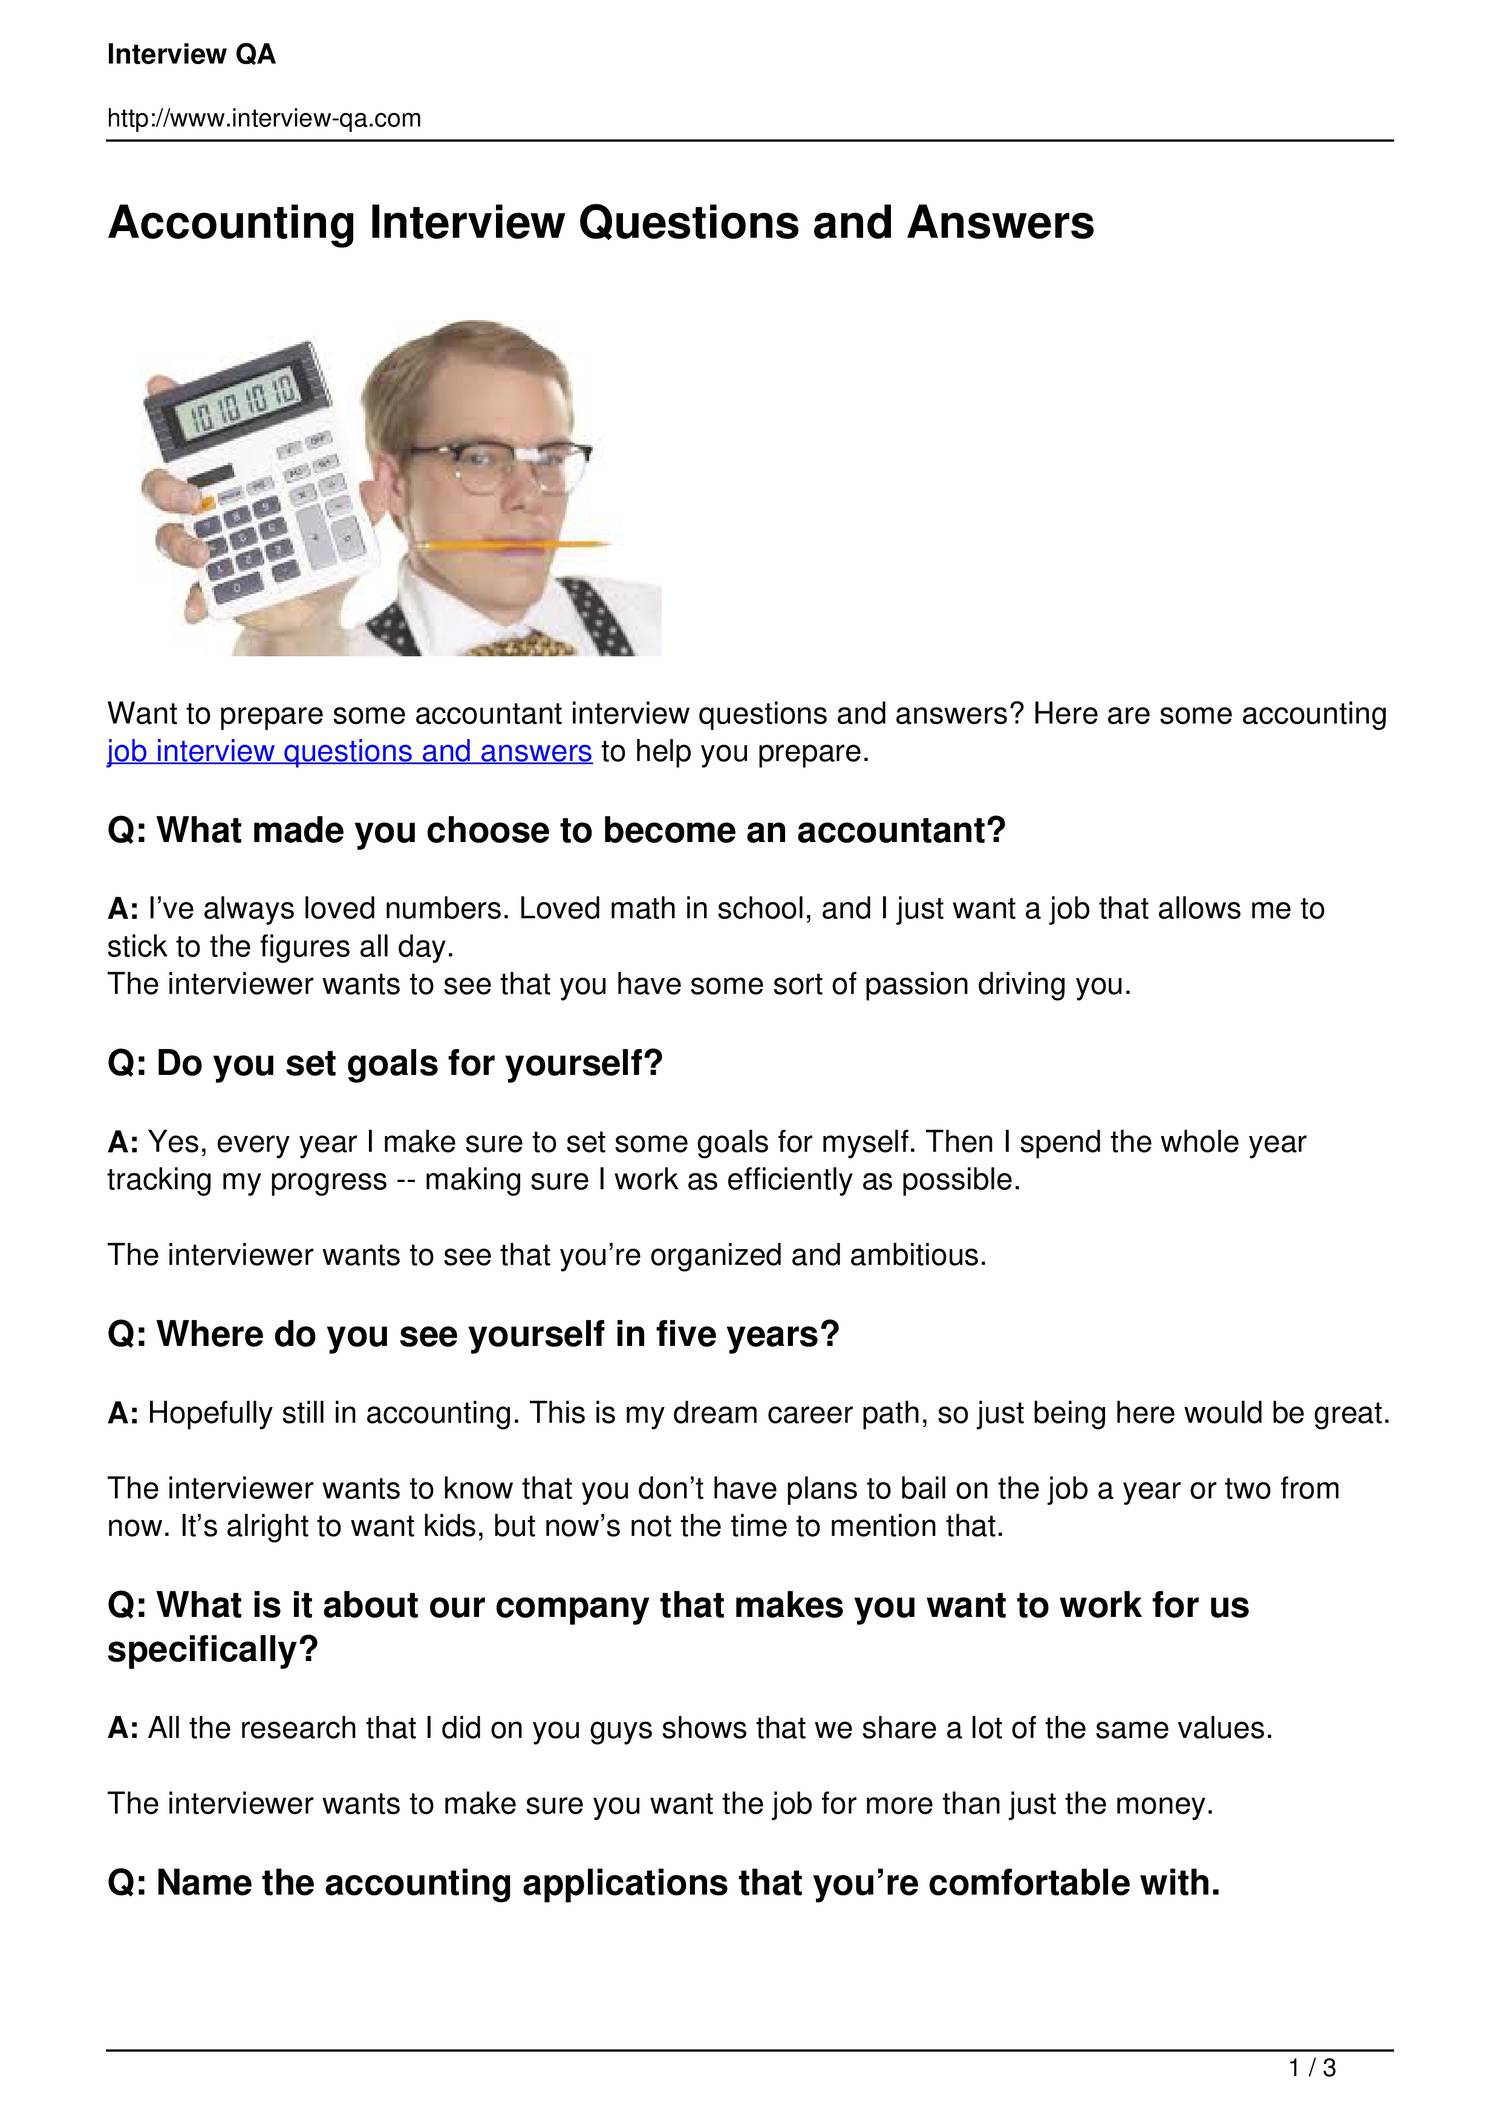 Interview questions for an accountant job